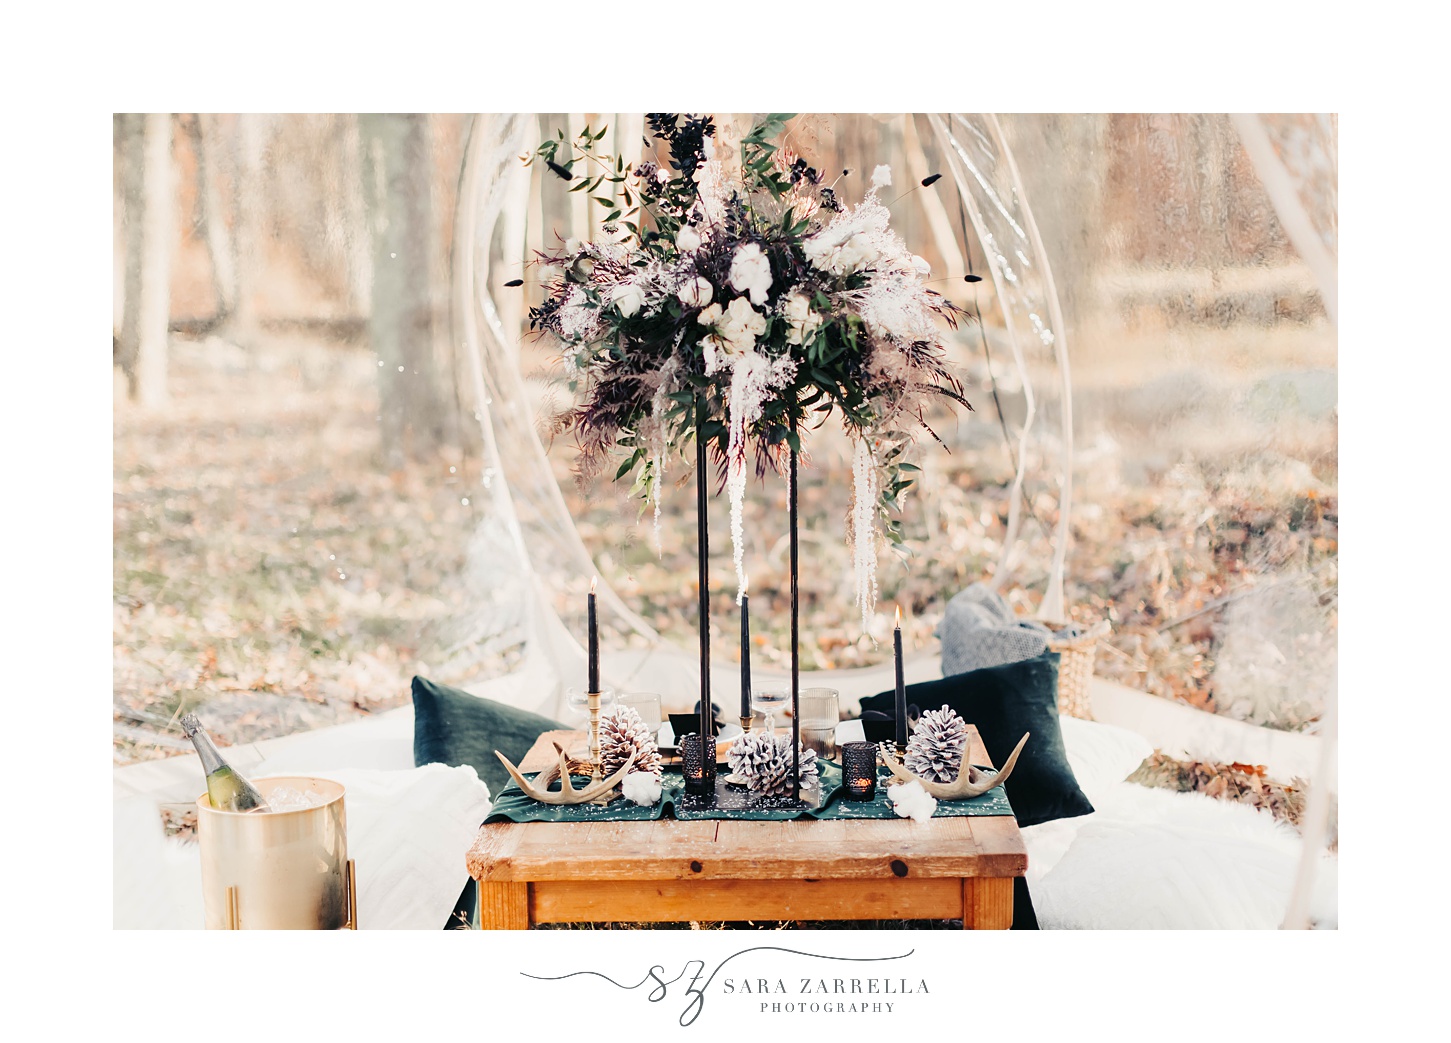 details for Cozy Winter Proposal at Gerald's Farm